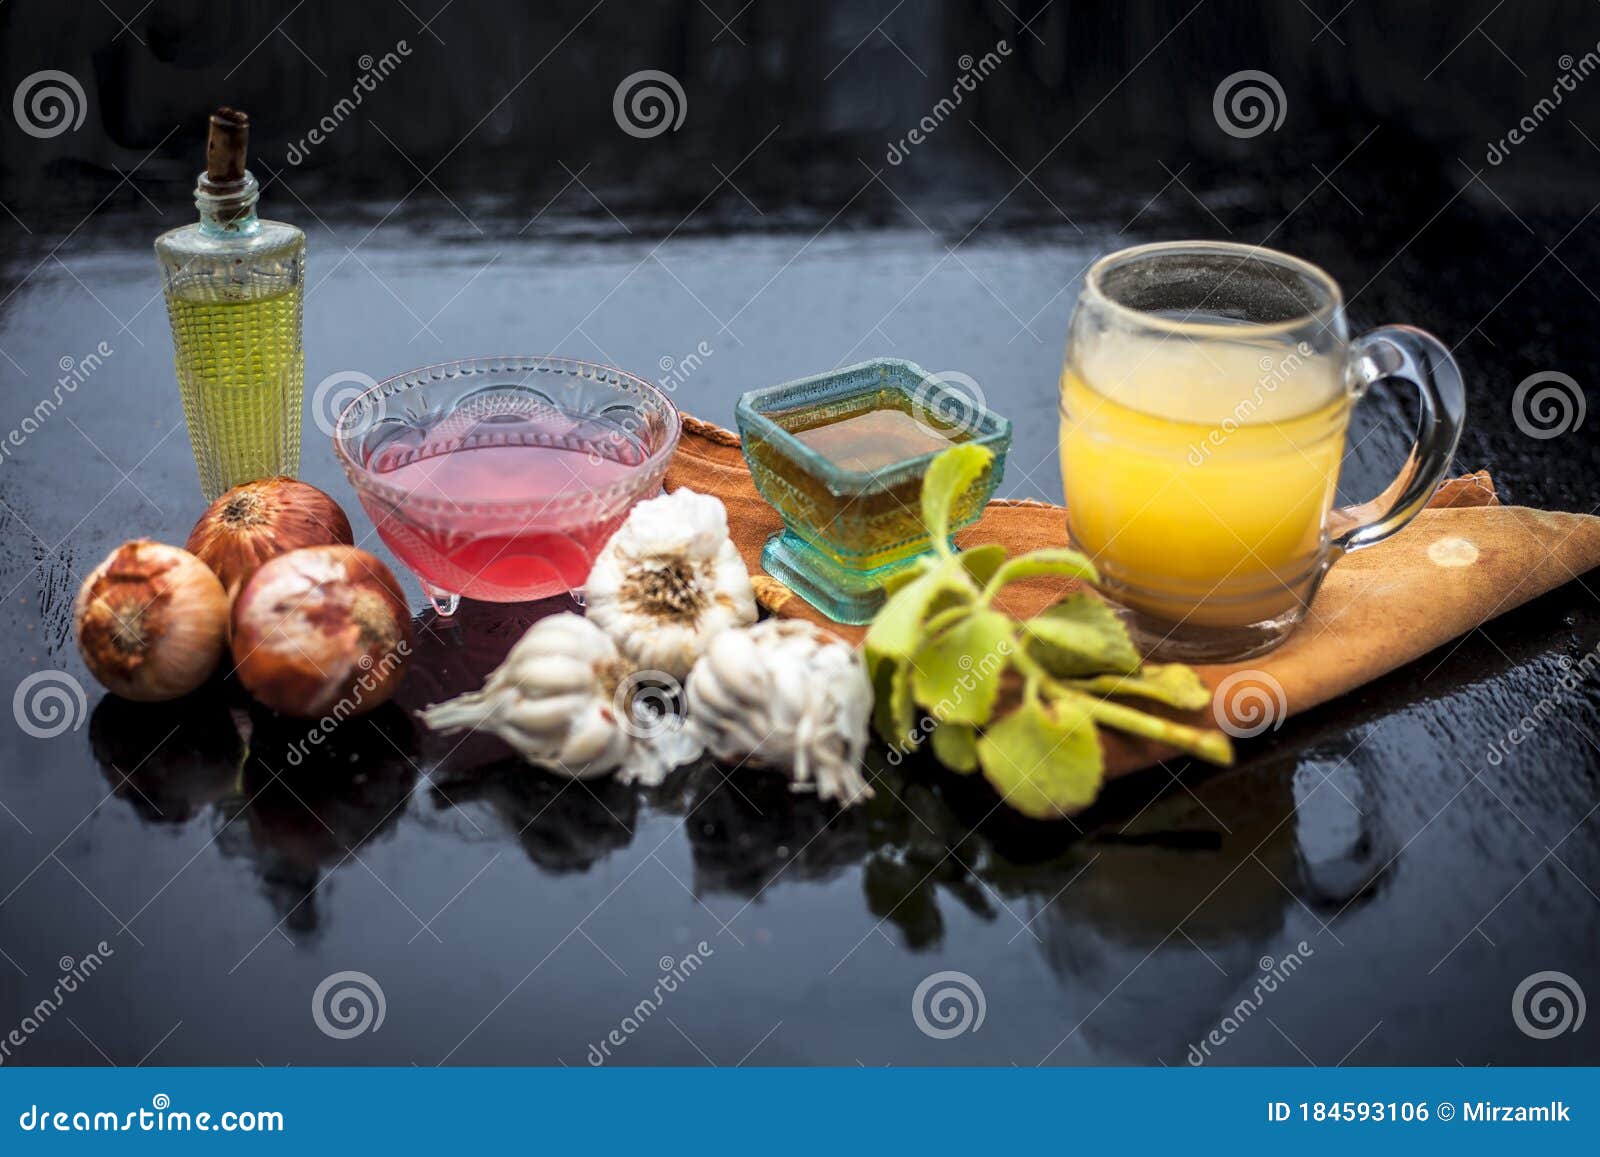 Close Up of Hair Treatment or Remedy To Increase Hair Growth Instantly  Consisting of Onion Juice, Garlic Juice and Olive Oil in a Stock Photo -  Image of health, medicine: 184593106